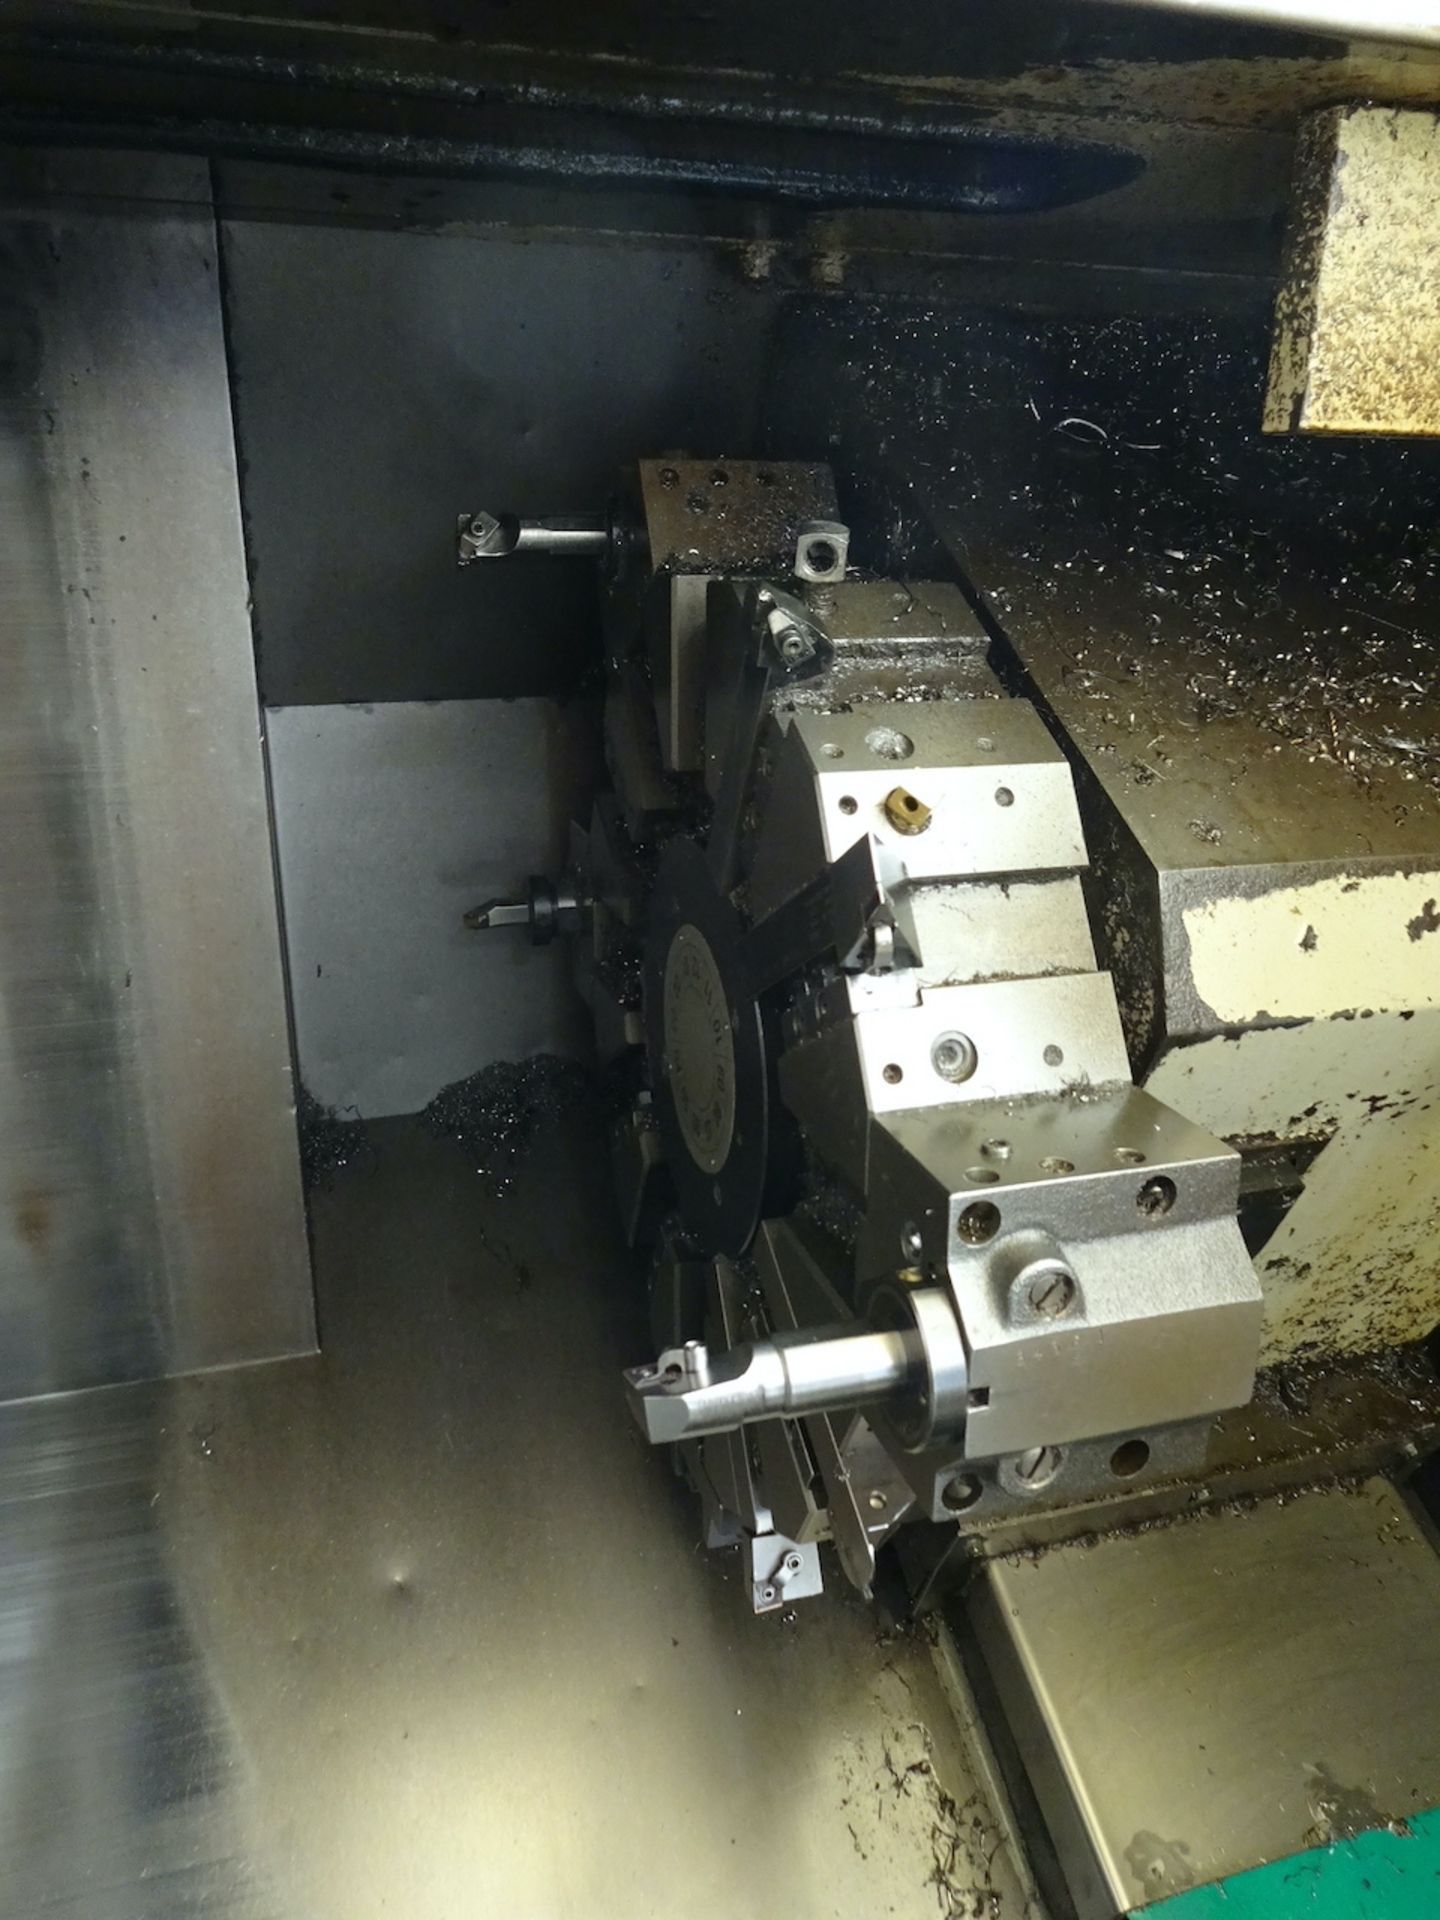 Mazak Model QT-250 Universal CNC Turning Center, S/N 139445 (1998), 8 in. 3-Jaw Chuck, 12 Station - Image 7 of 9